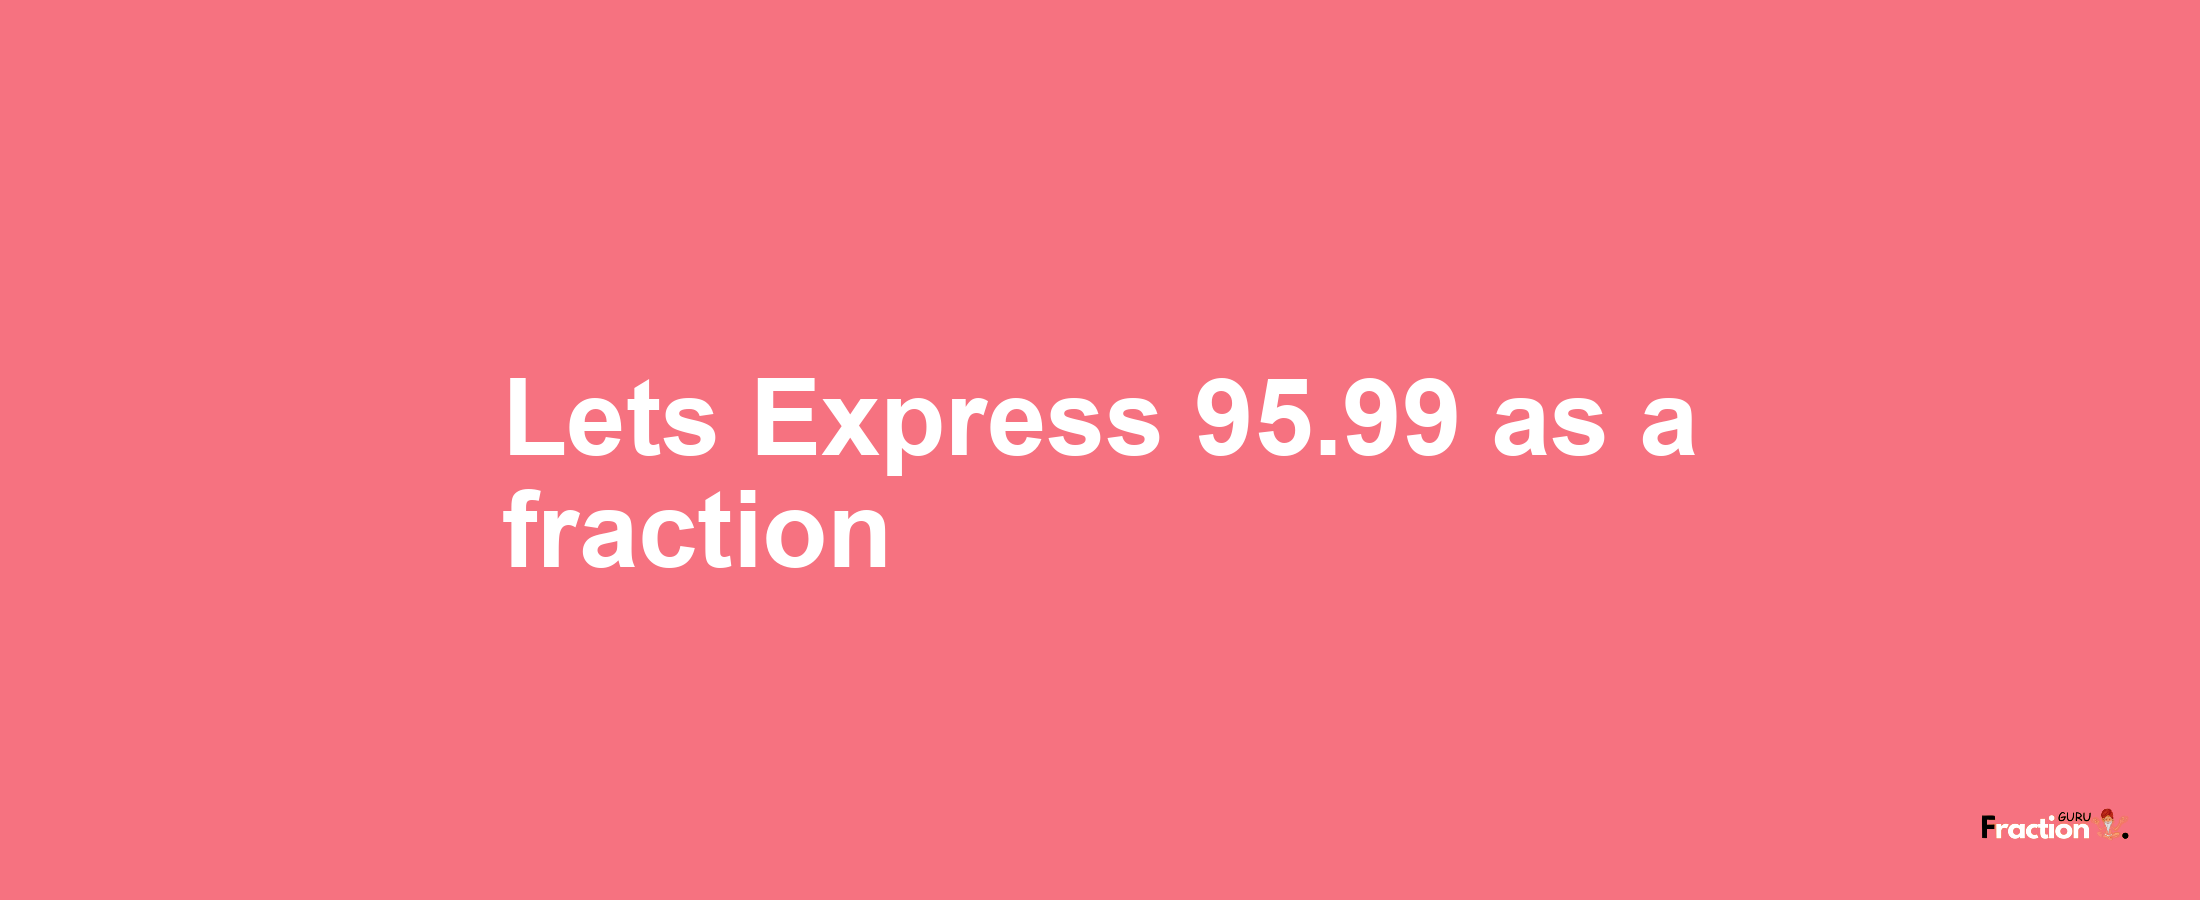 Lets Express 95.99 as afraction